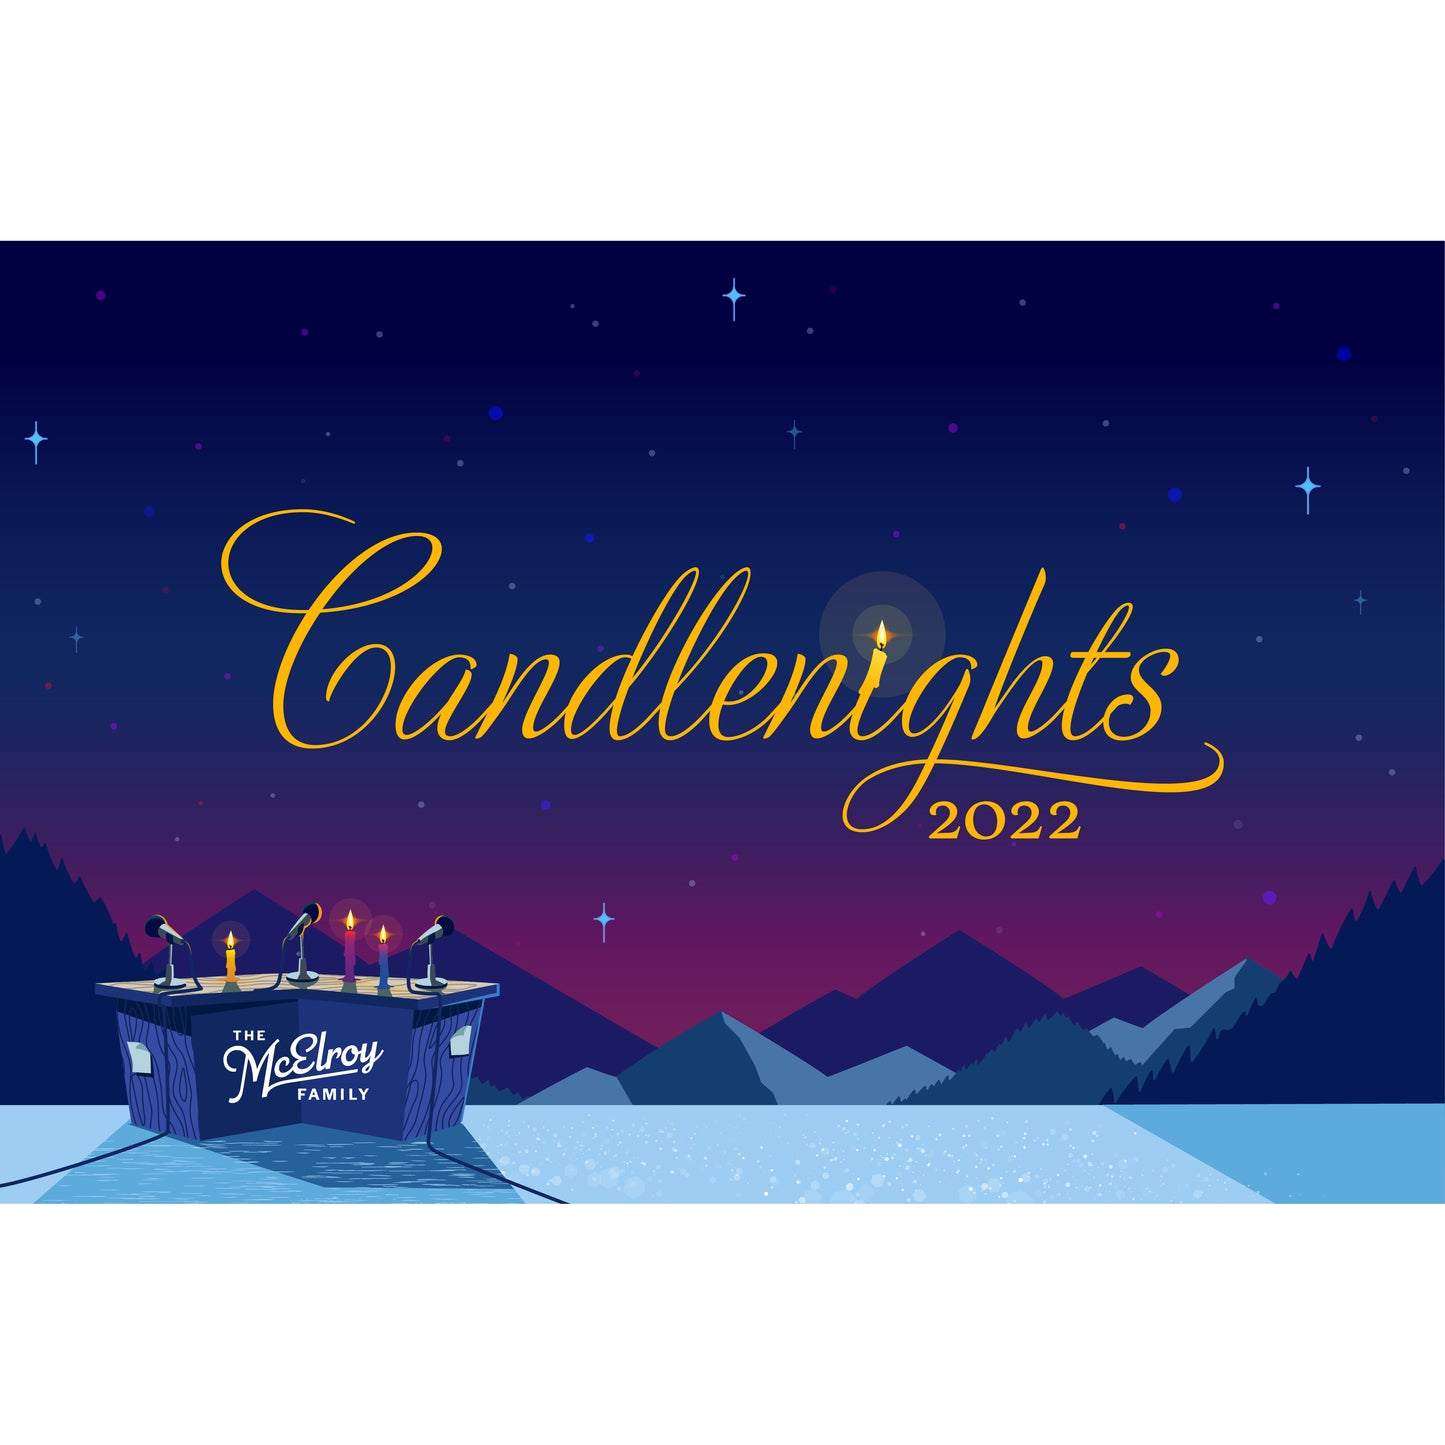 2022 Candlenights VOD Package